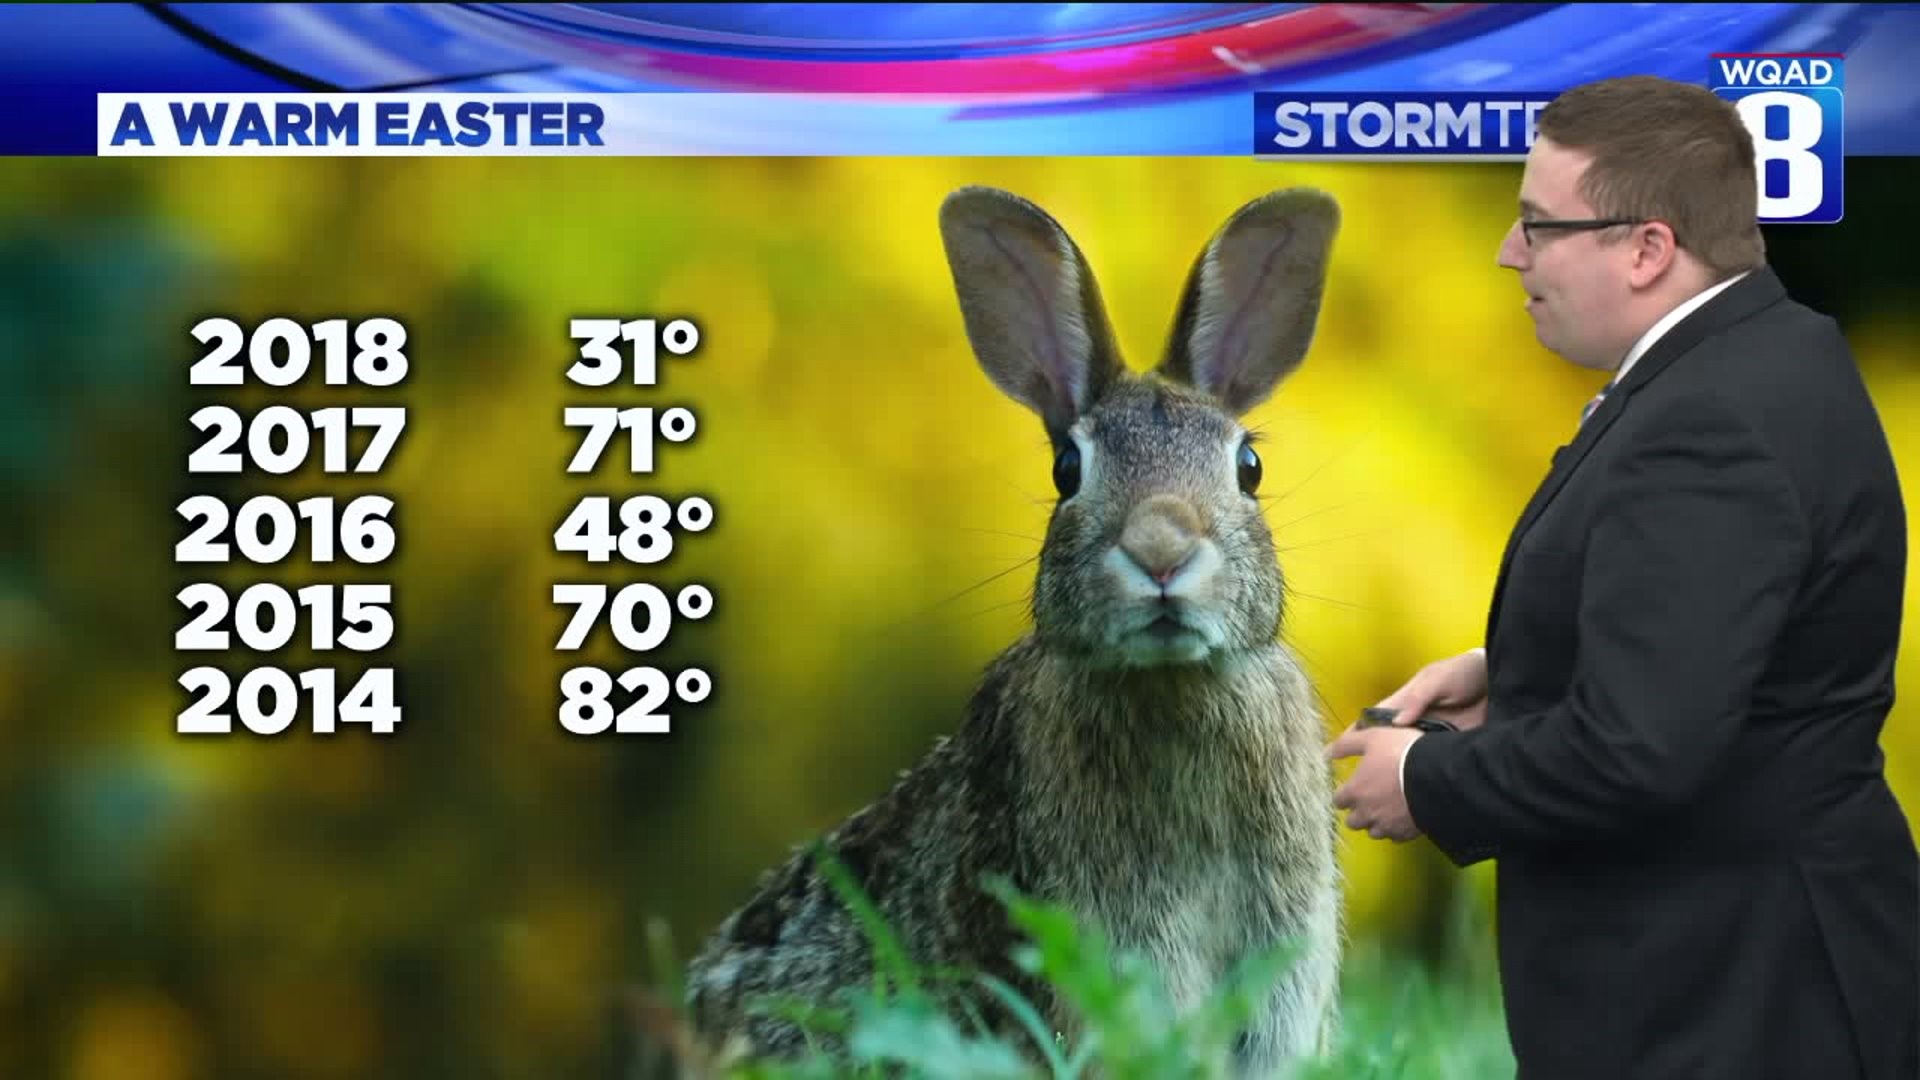 A nice warming trend for Easter weekend